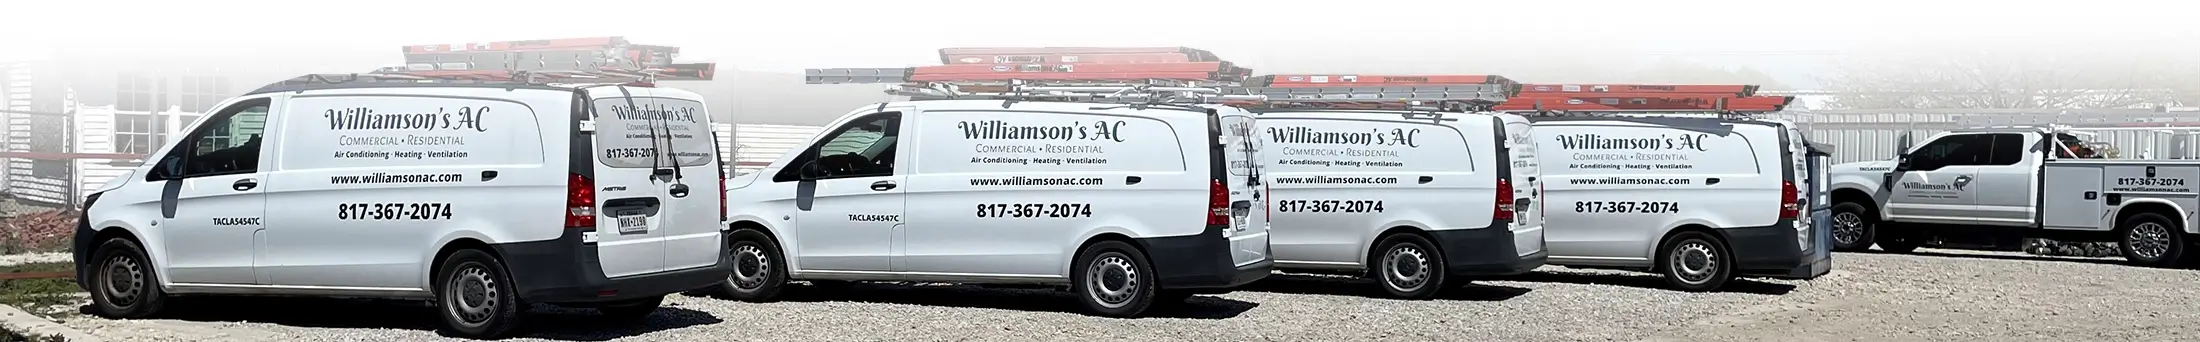 Find out ways to save energy and money with Williamson's AC Contracting's Ductless Air Conditioning repair services in White Settlement TX